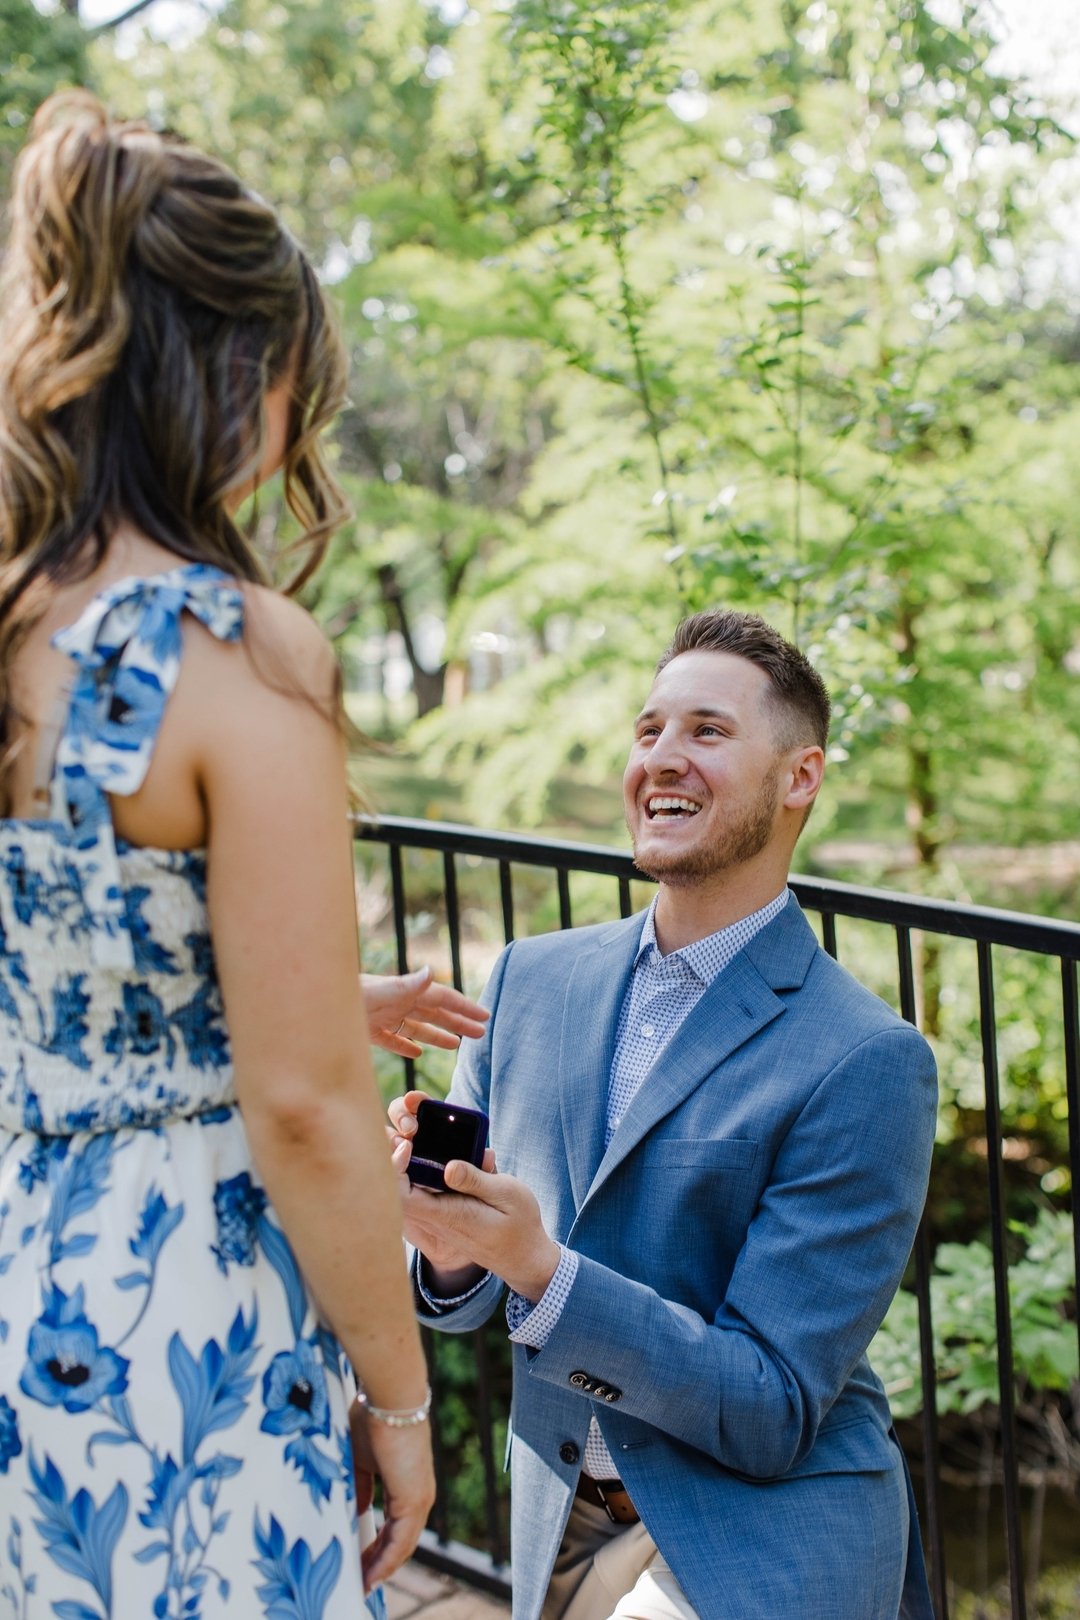 Swipe to see THE happiest proposal possibly ever.

It's always such an honor to photograph friends, especially in these big beautiful moments. 
And for some reason, no matter how many proposals I capture, I still get goosebumps and those cheek cramps